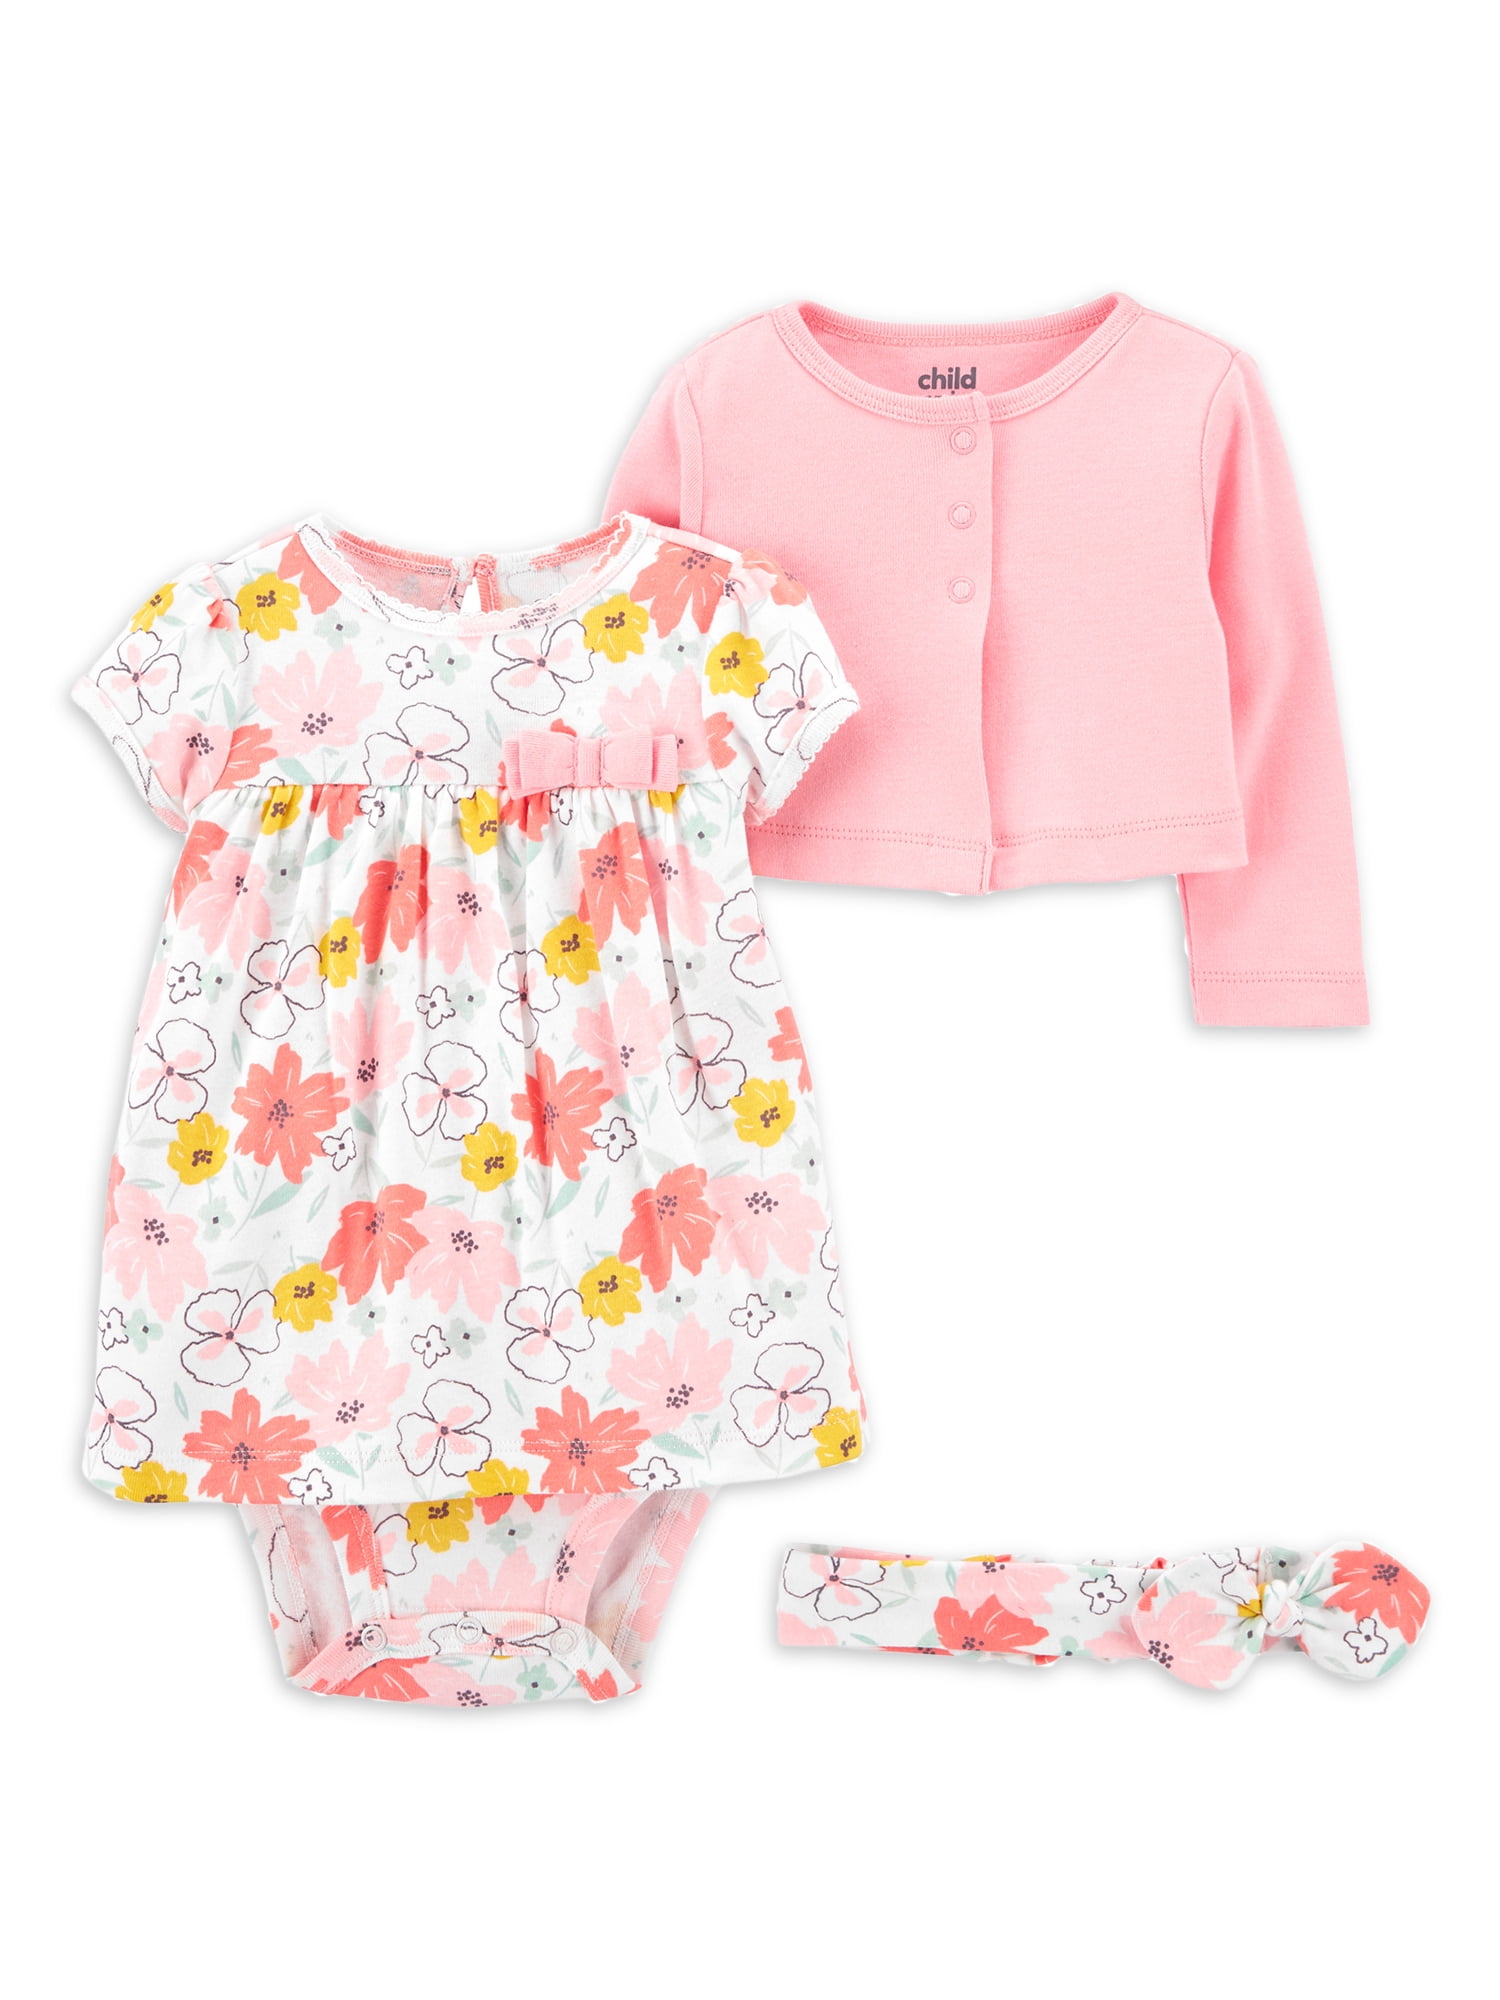 Baby - Live for Summer 6 Months Carters Baby Girls 4 Piece Print PJ Set 